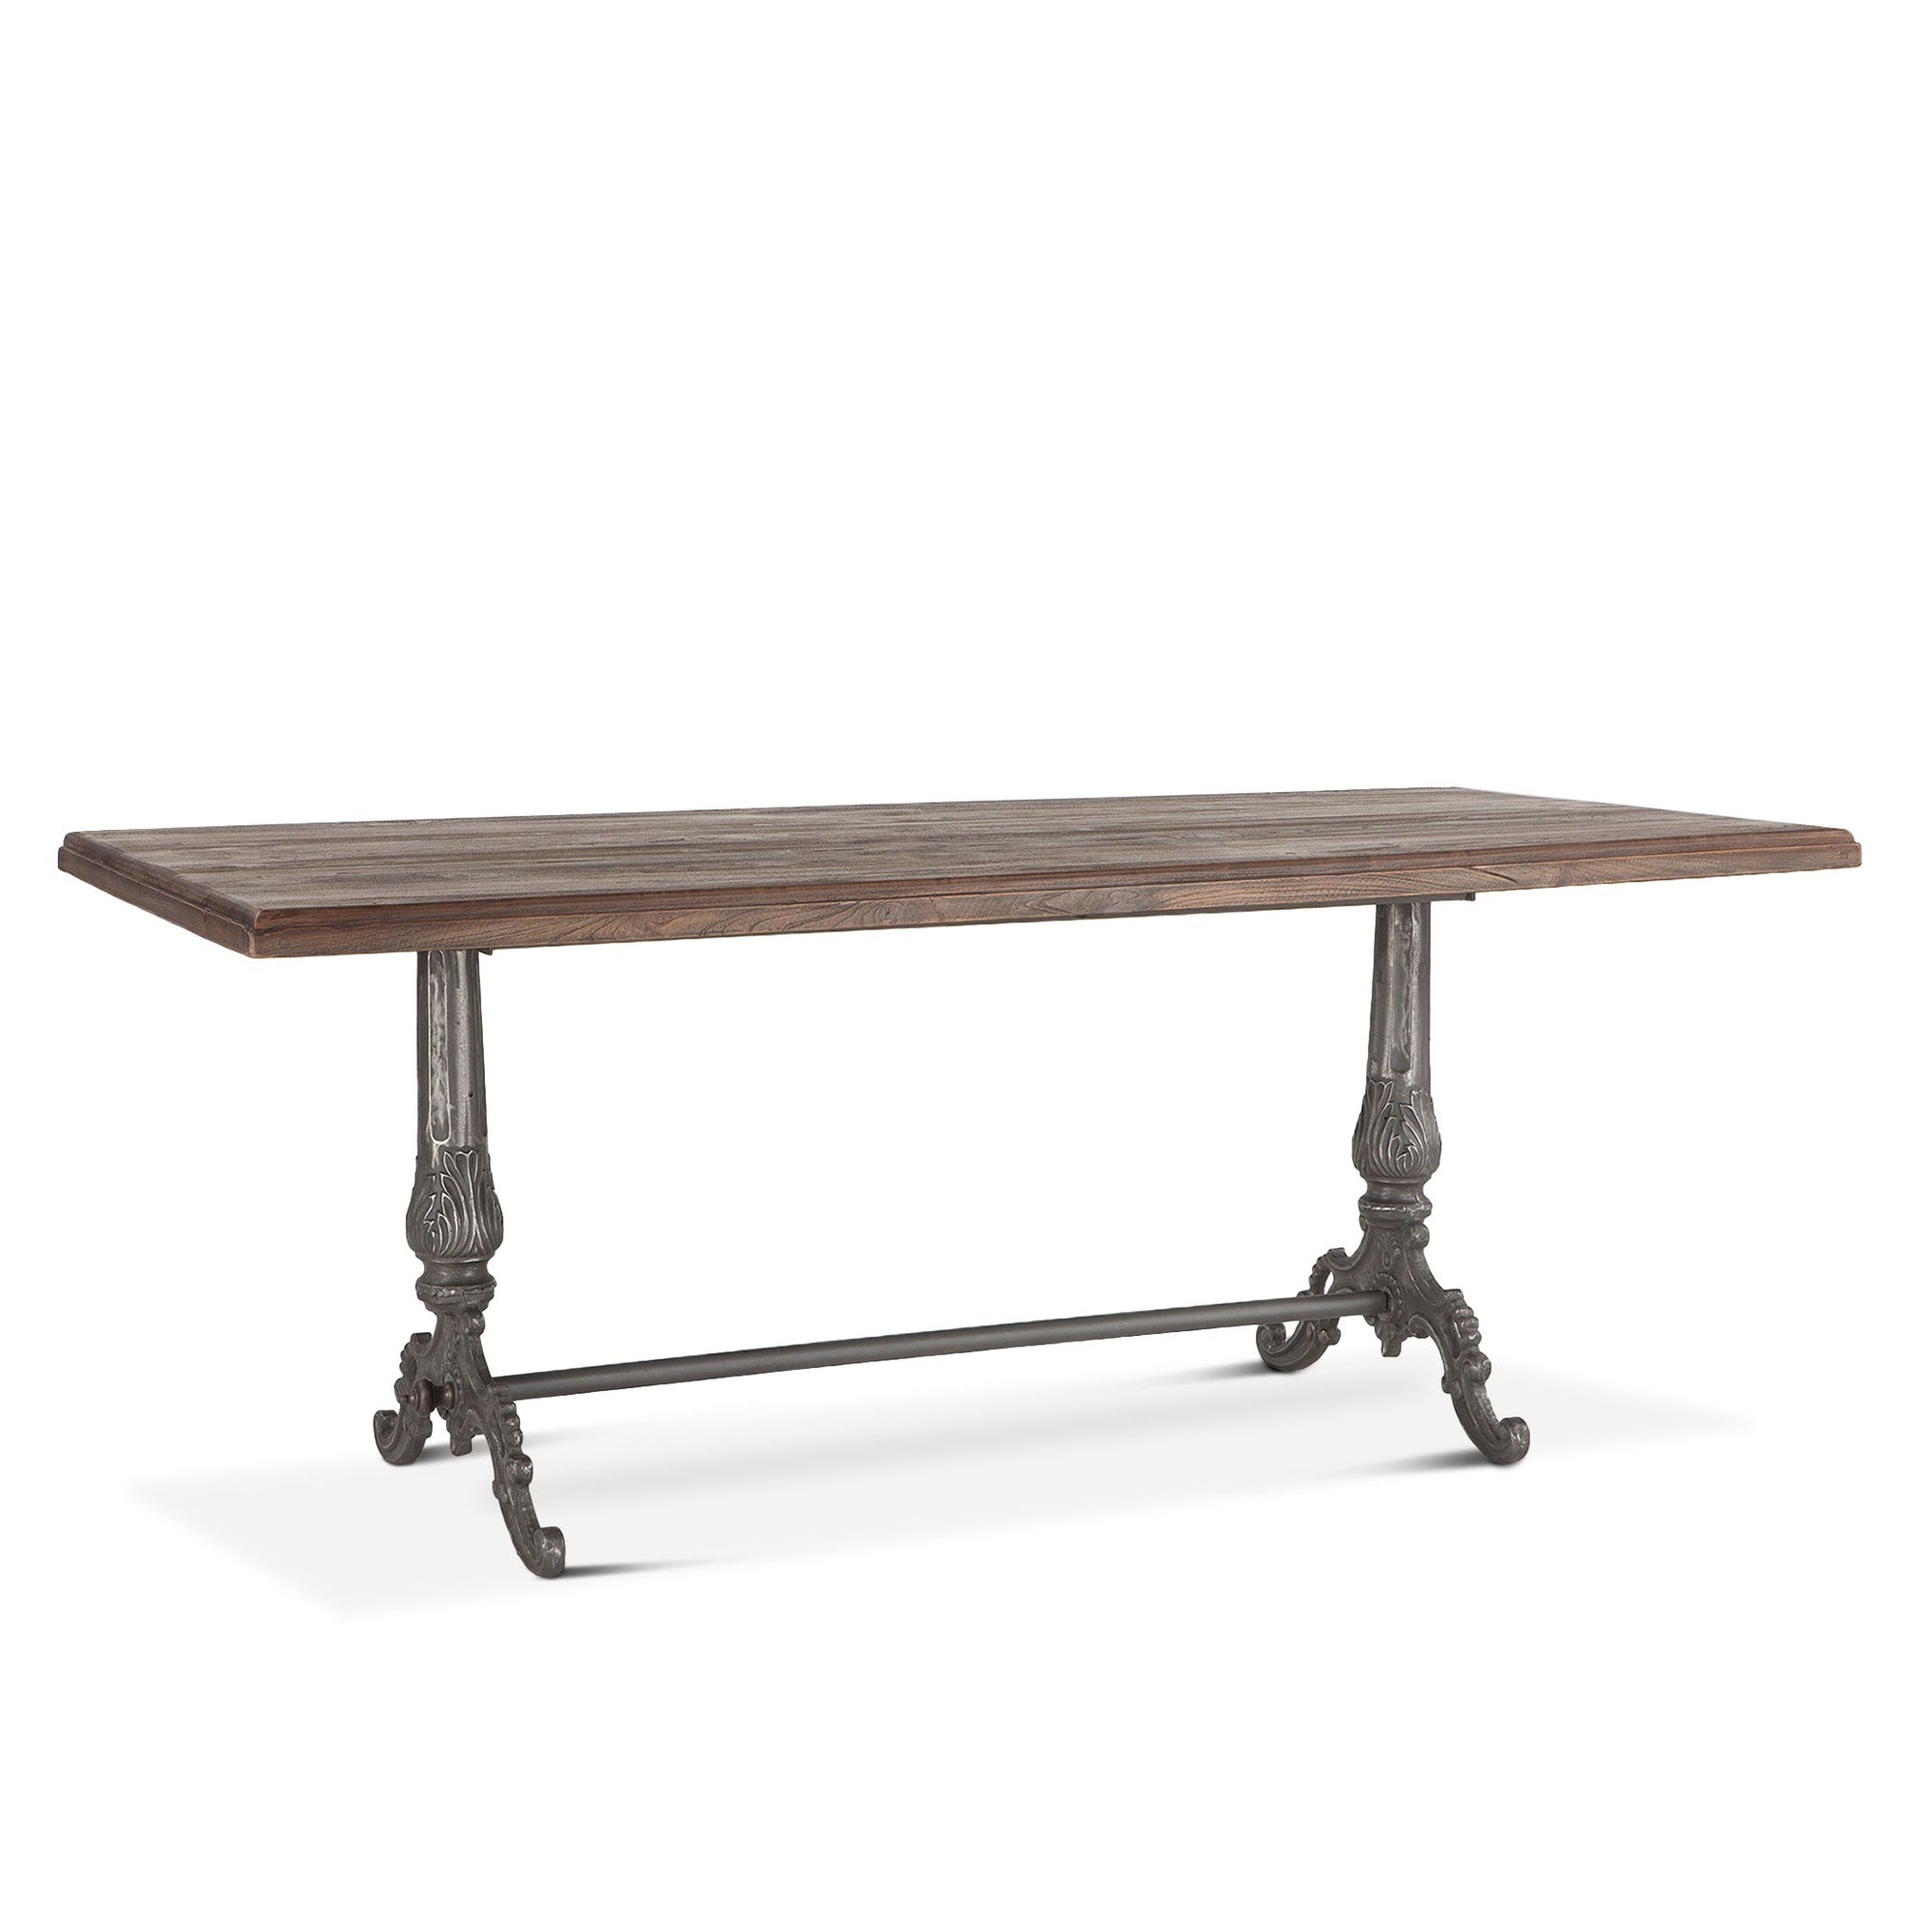 76" Market Cast Iron Base Dining Table - Furniture on Main